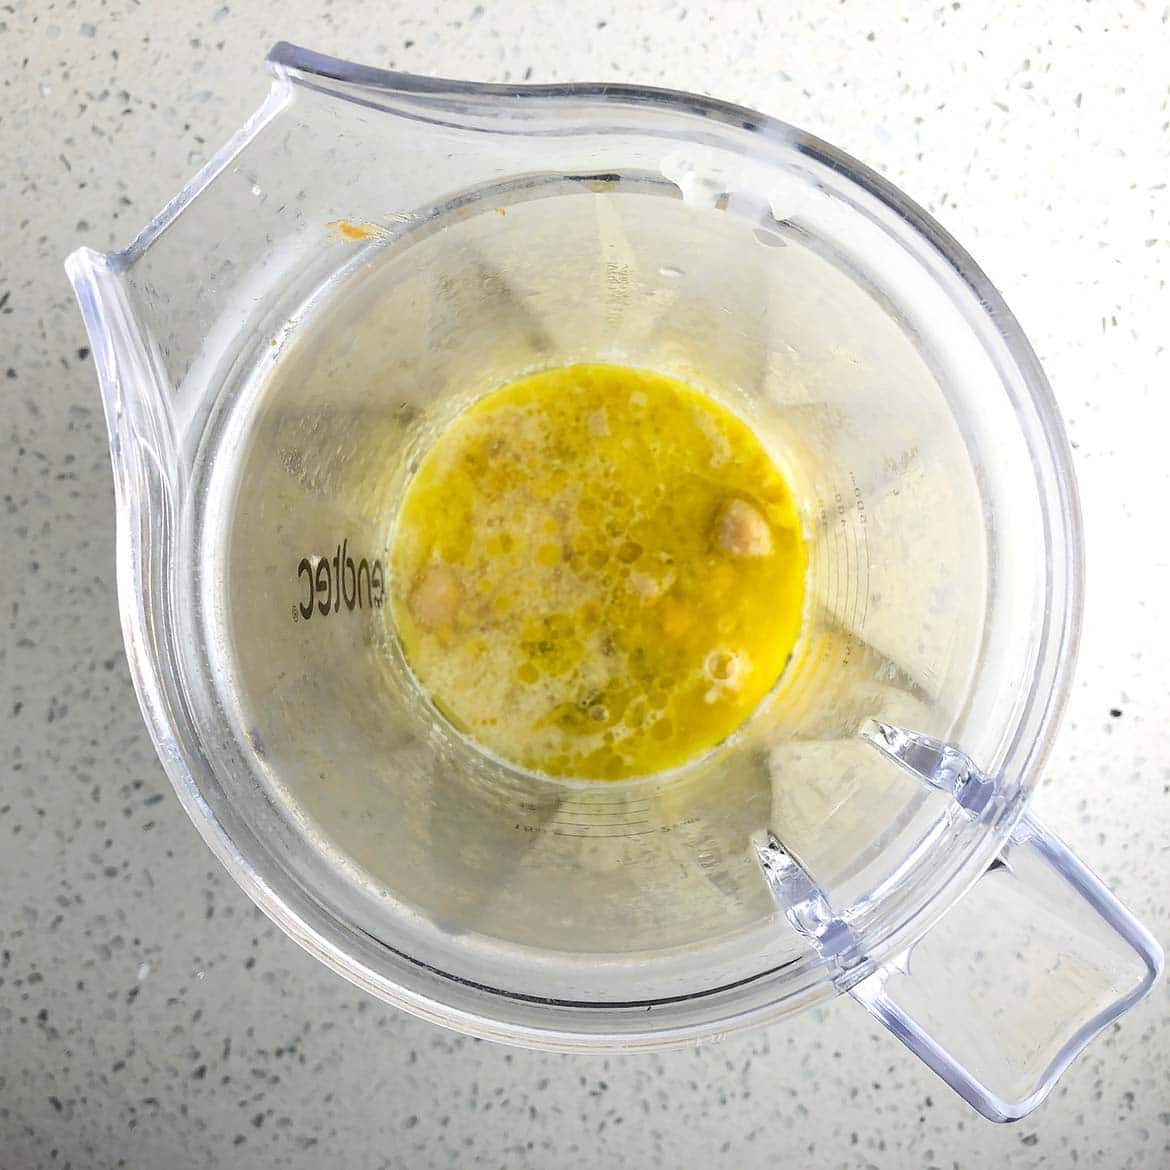 Top-down view of blender with ingredients for making Savoury Vegan Cheese Spread